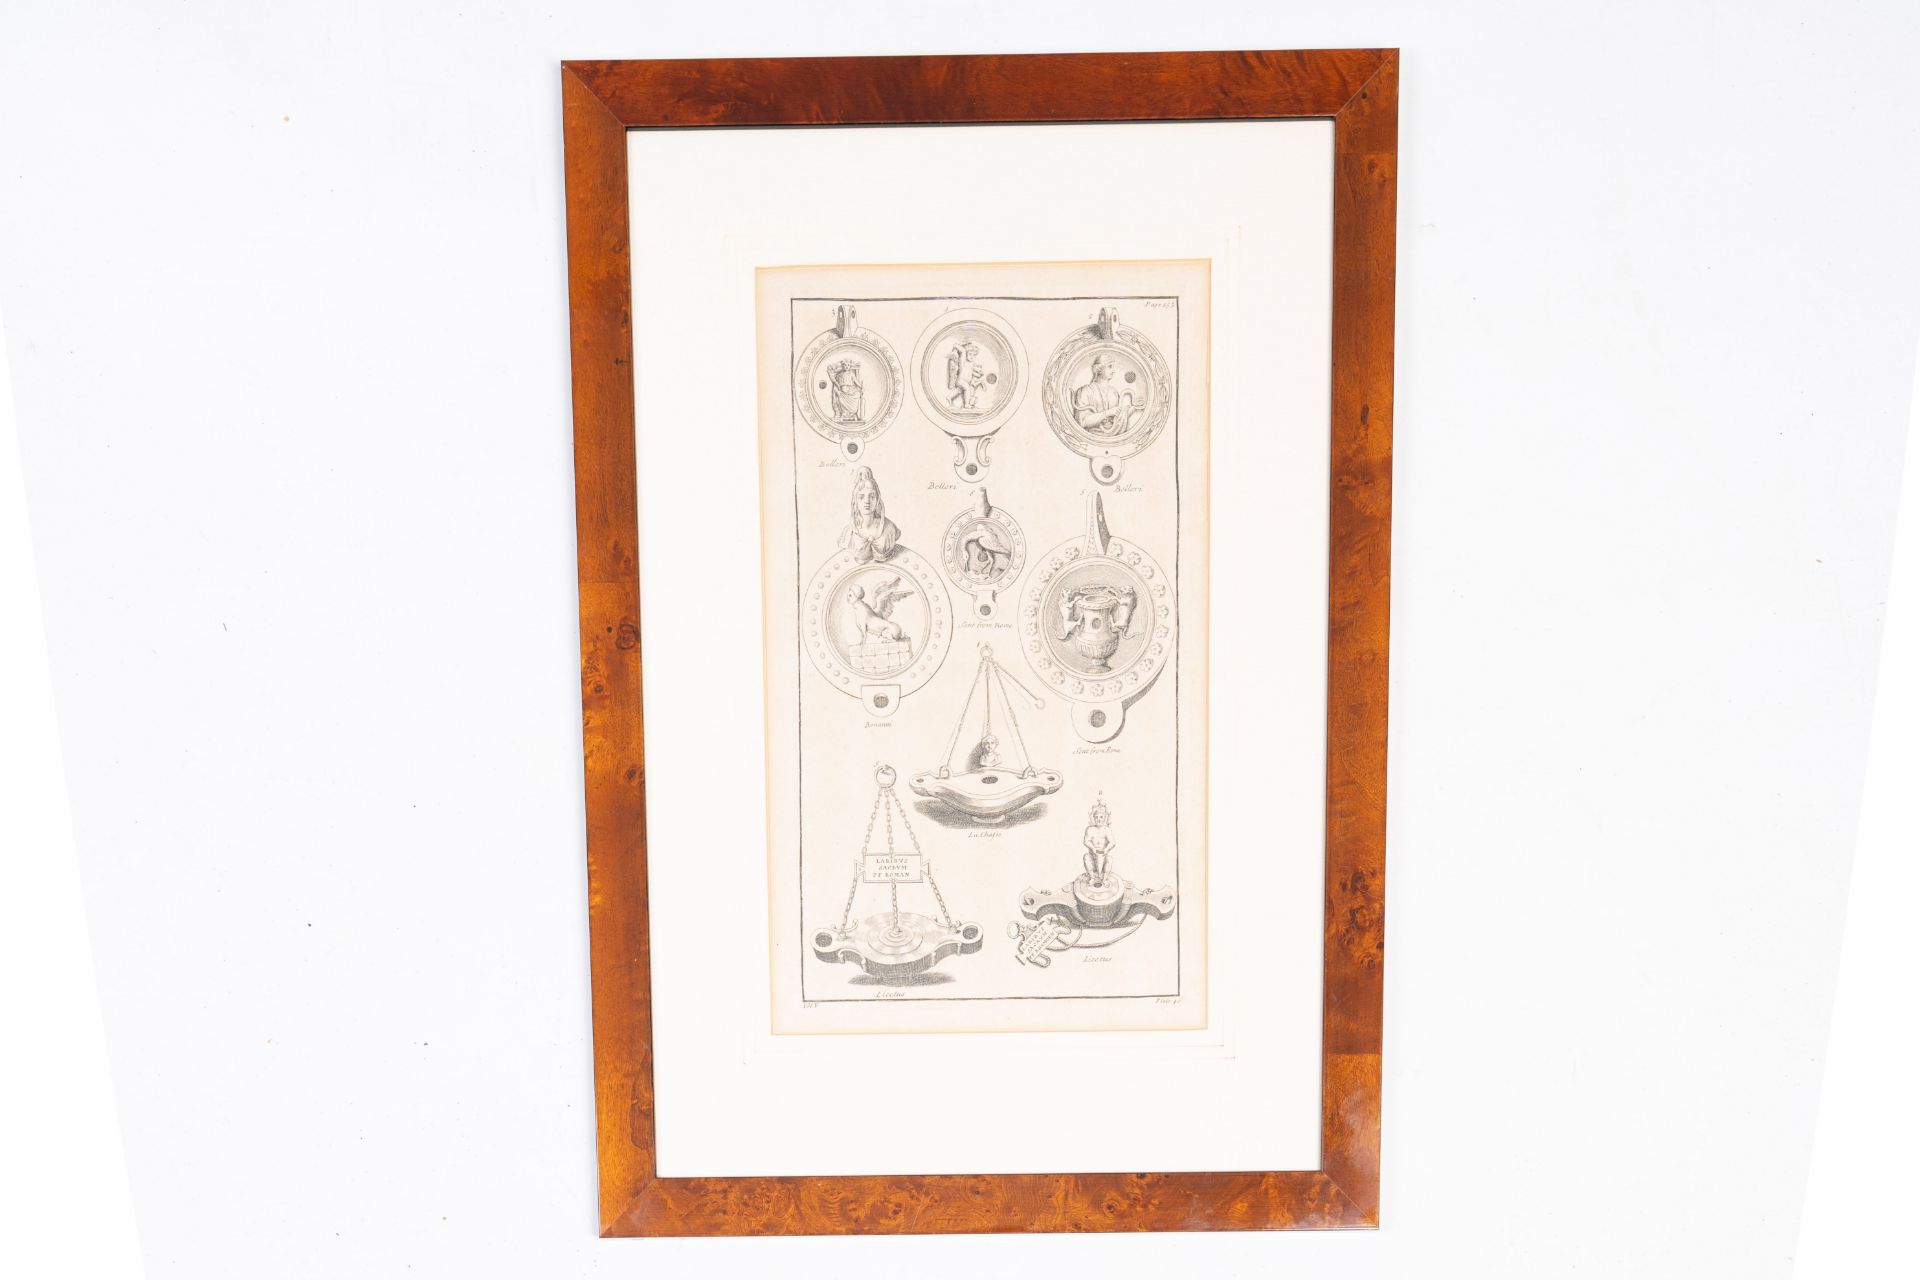 Eight framed engravings with oil lamps from 'L'antiquite expliquee et representee en figures' by Ber - Image 7 of 10